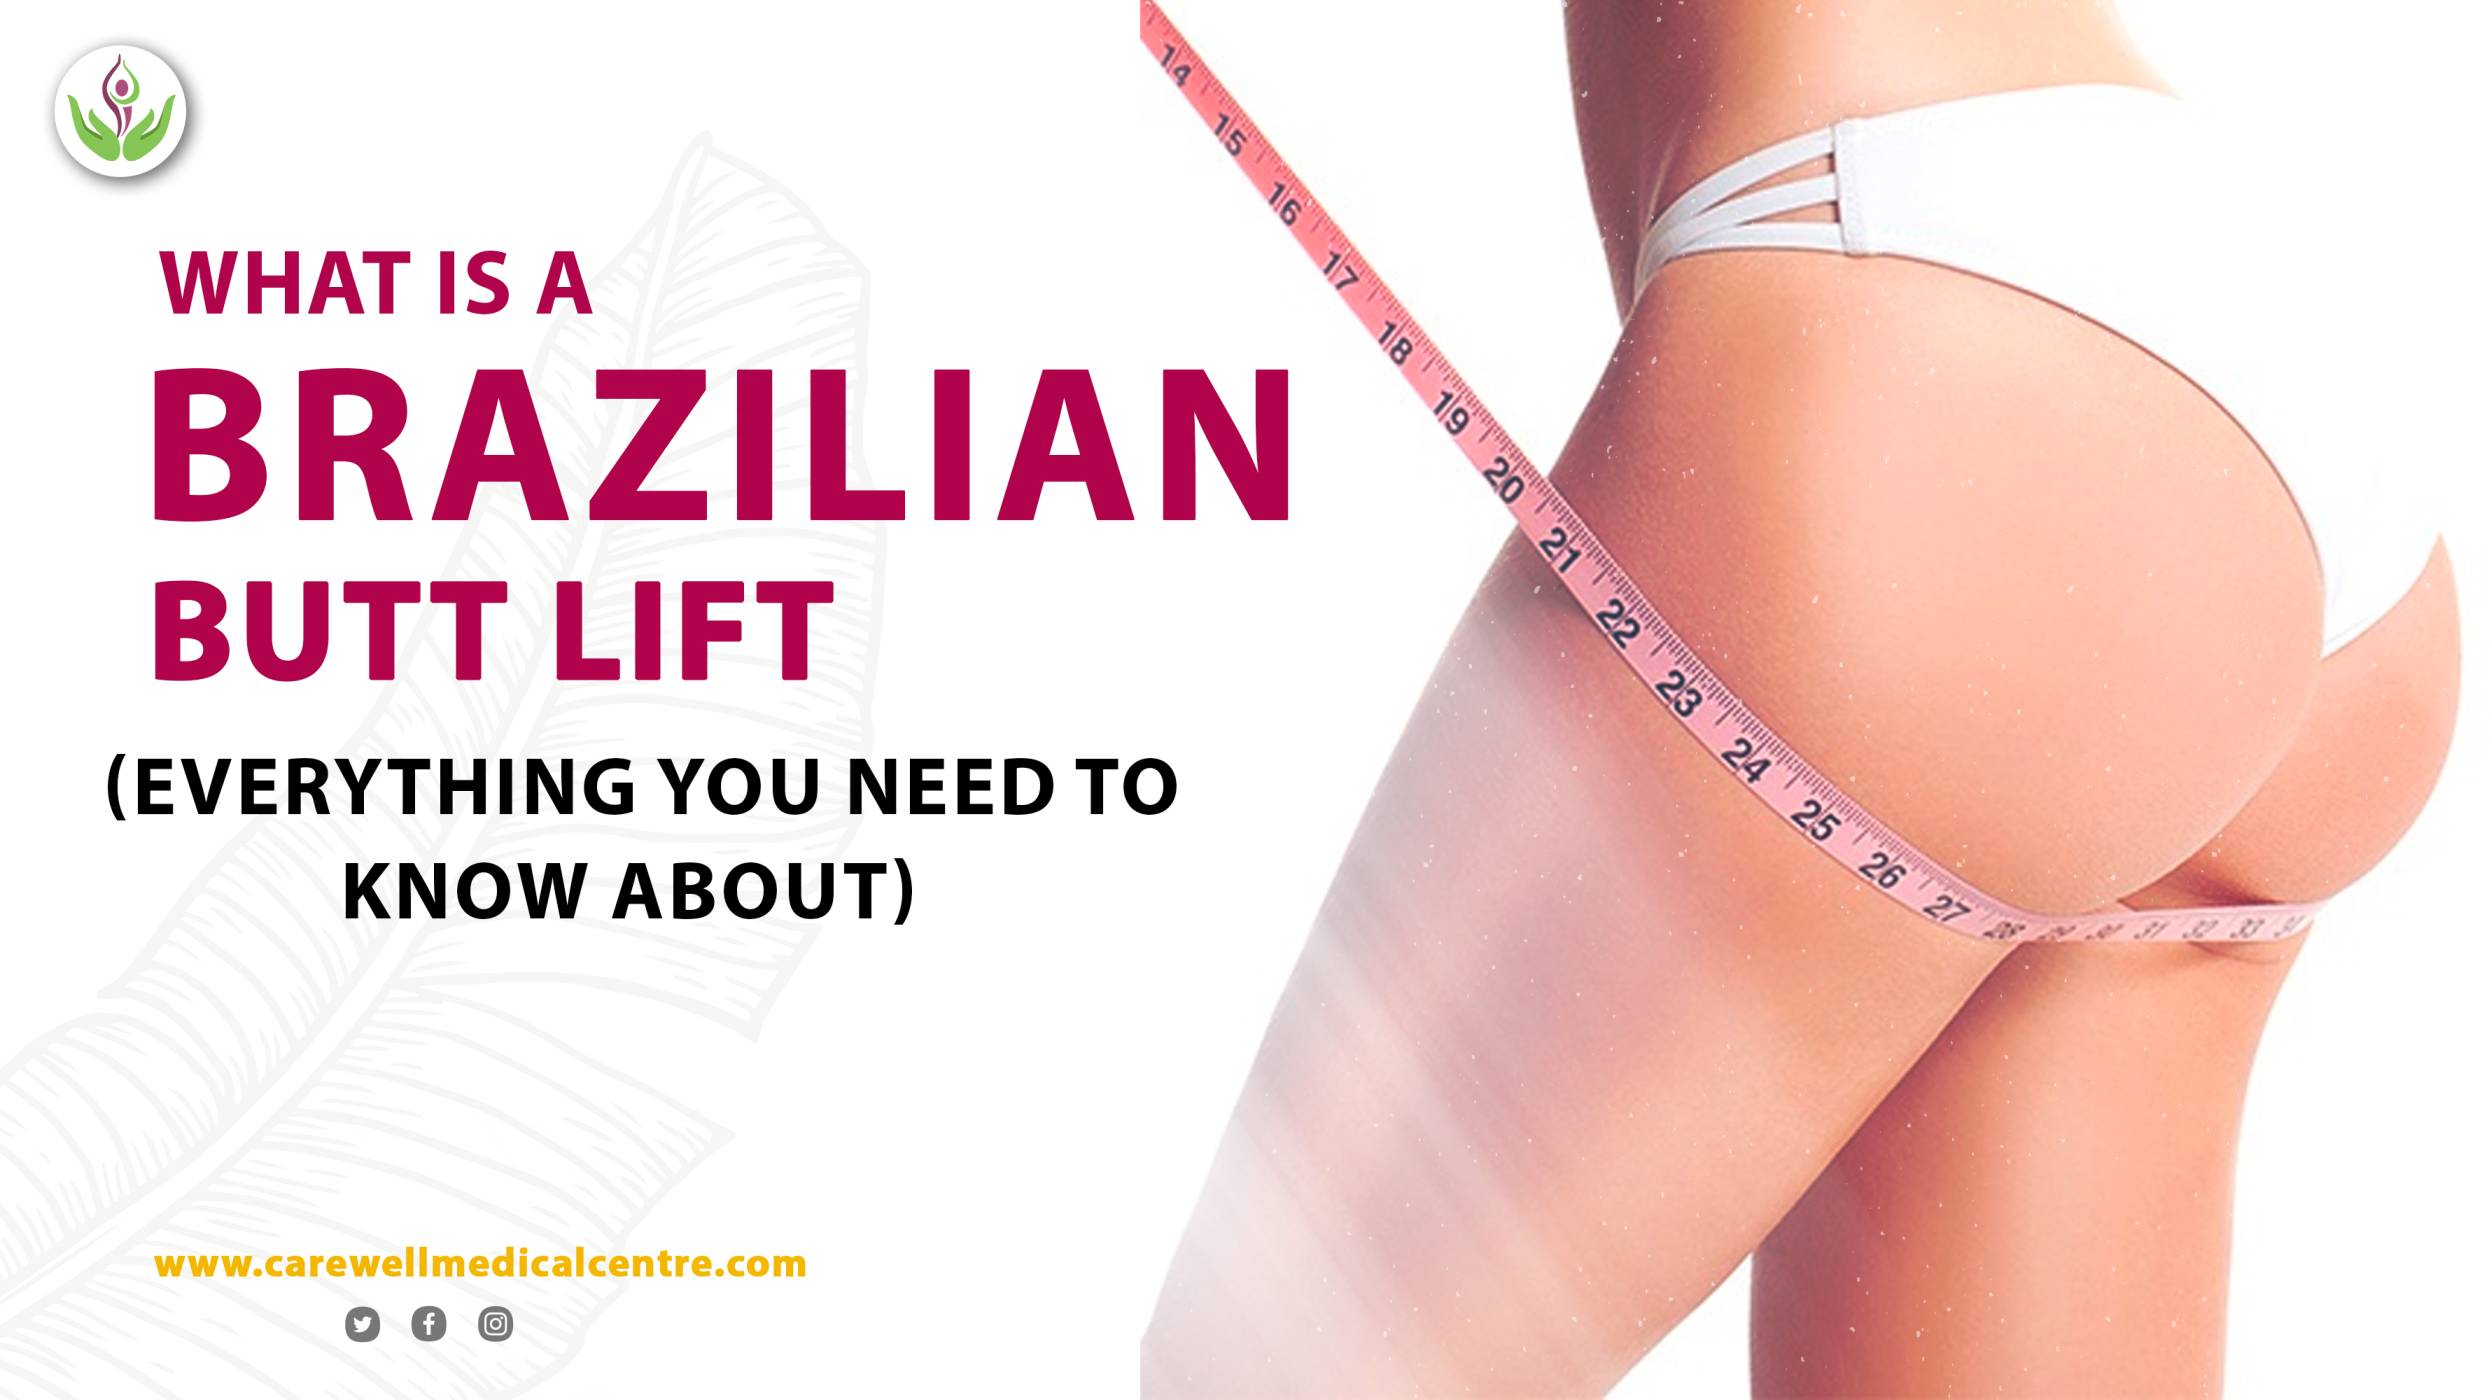 What Happens During the Brazilian Butt Lift?